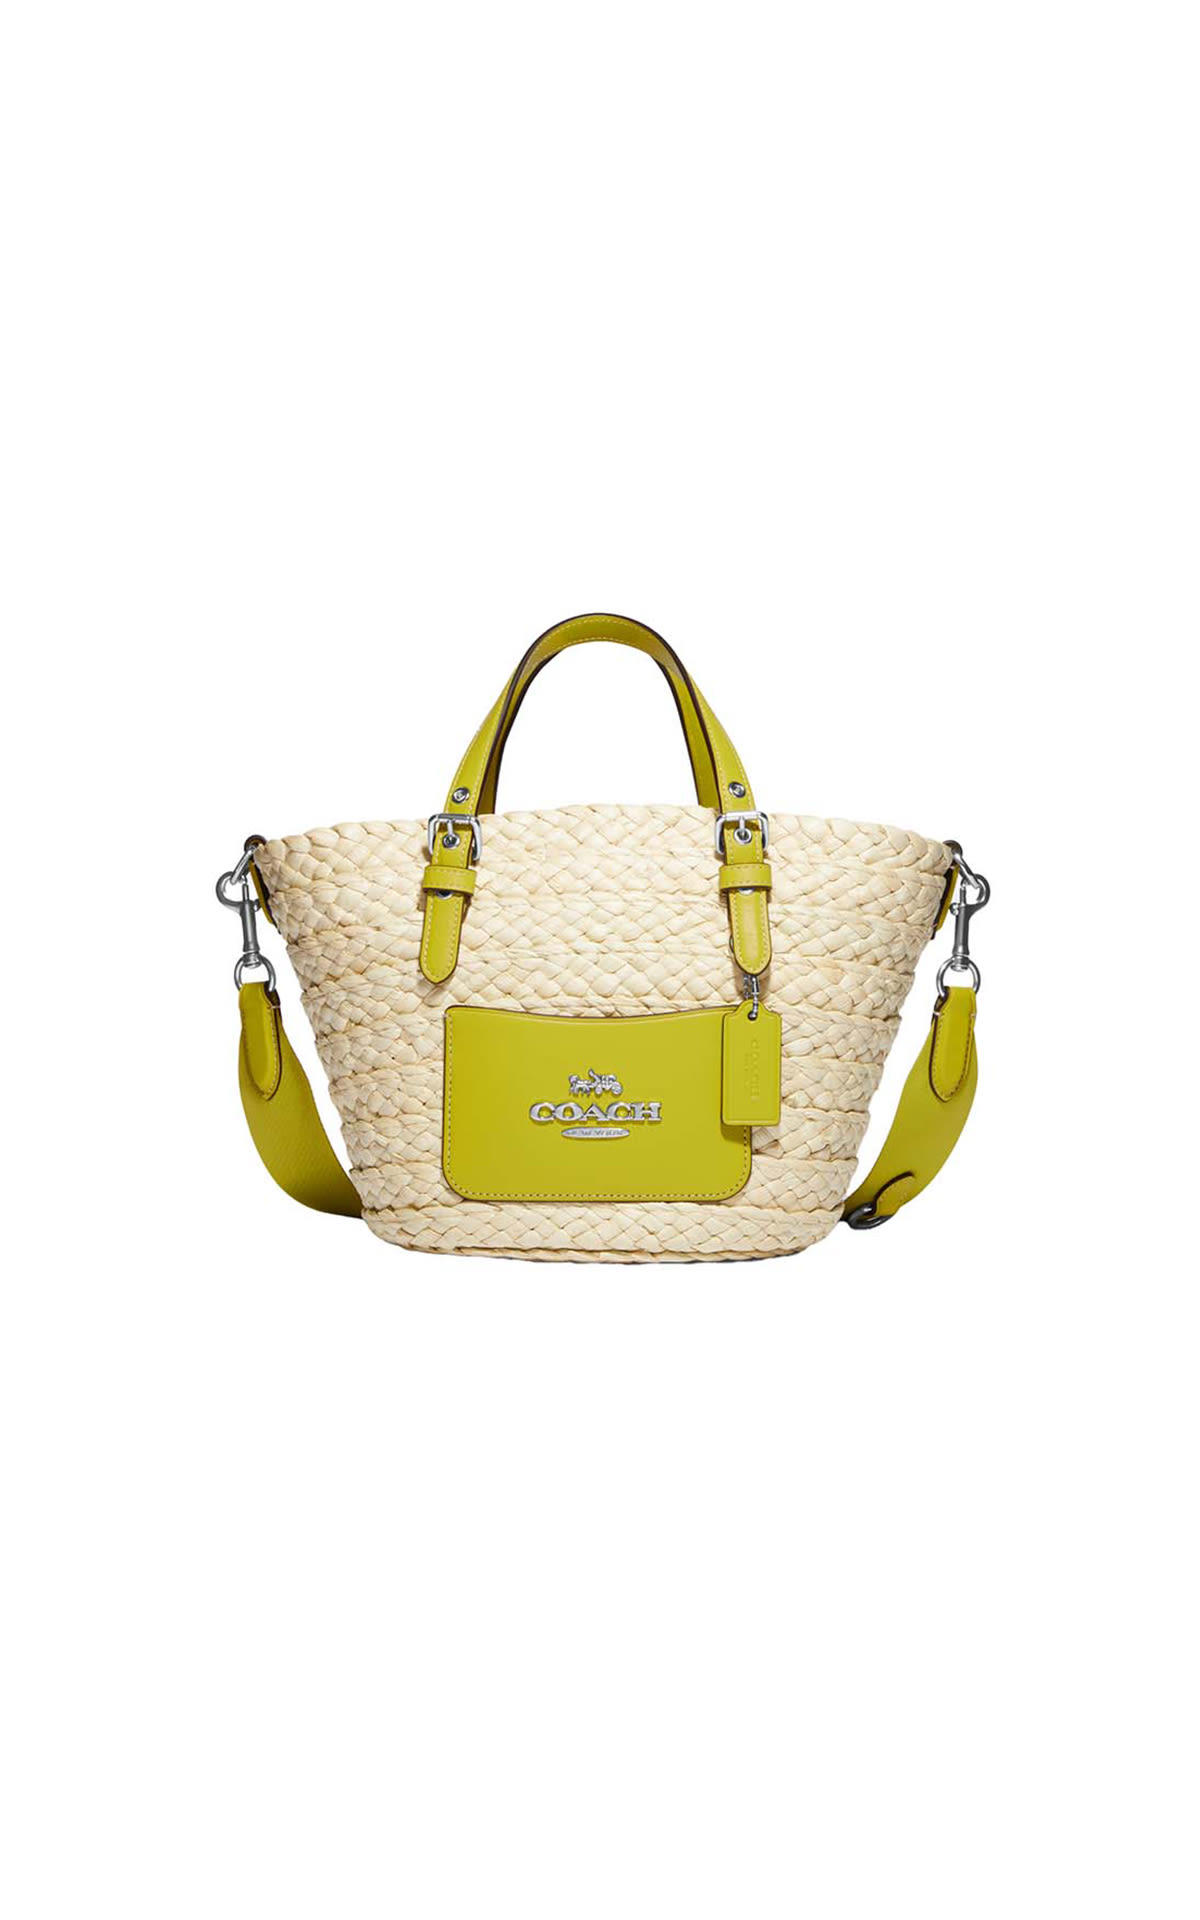 Coach Small straw tote in key lime